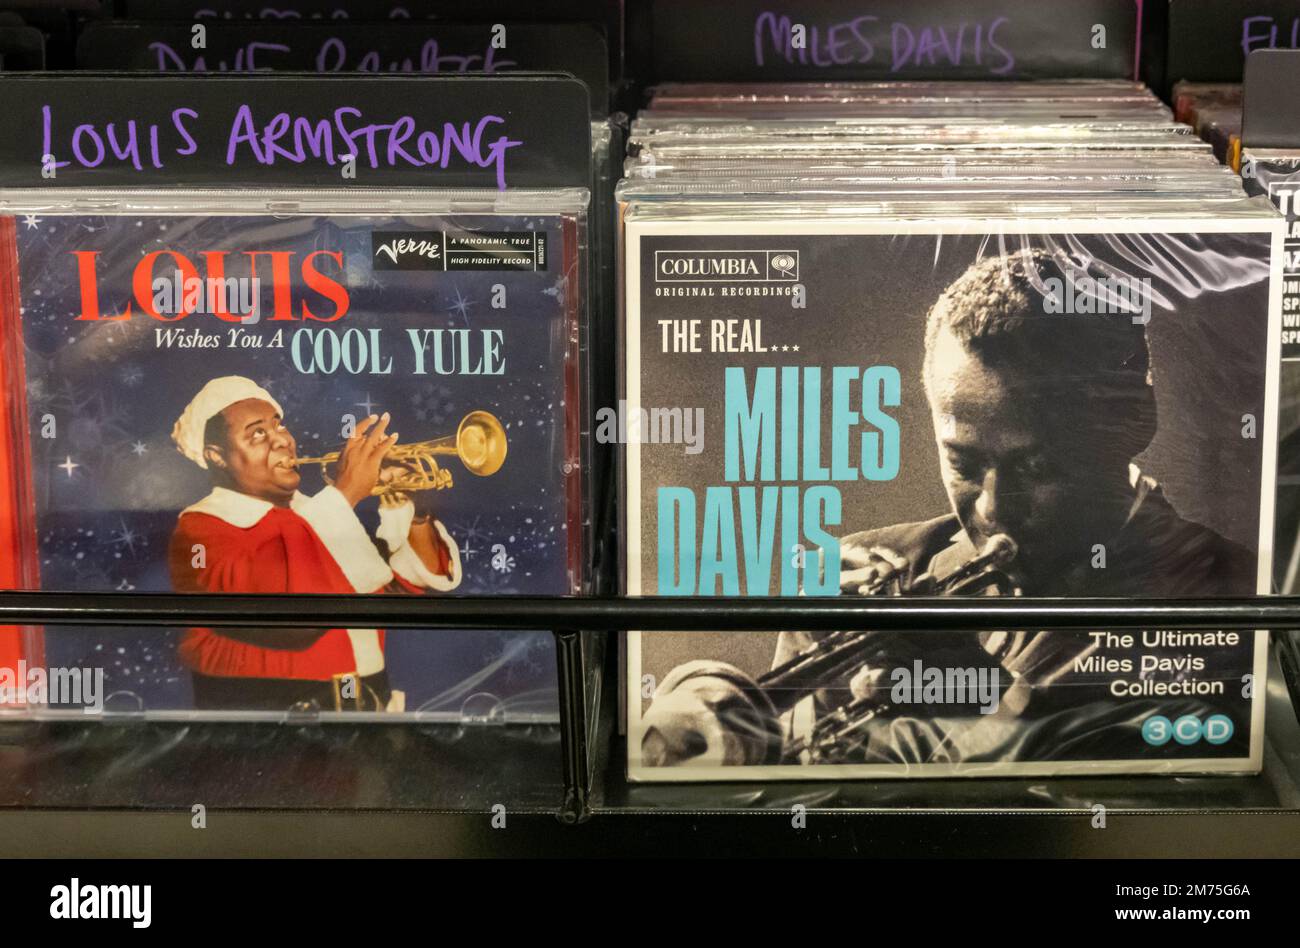 Louis Armstrong and Miles Davis albums for sale a The HMV Shop in Liverpool Stock Photo